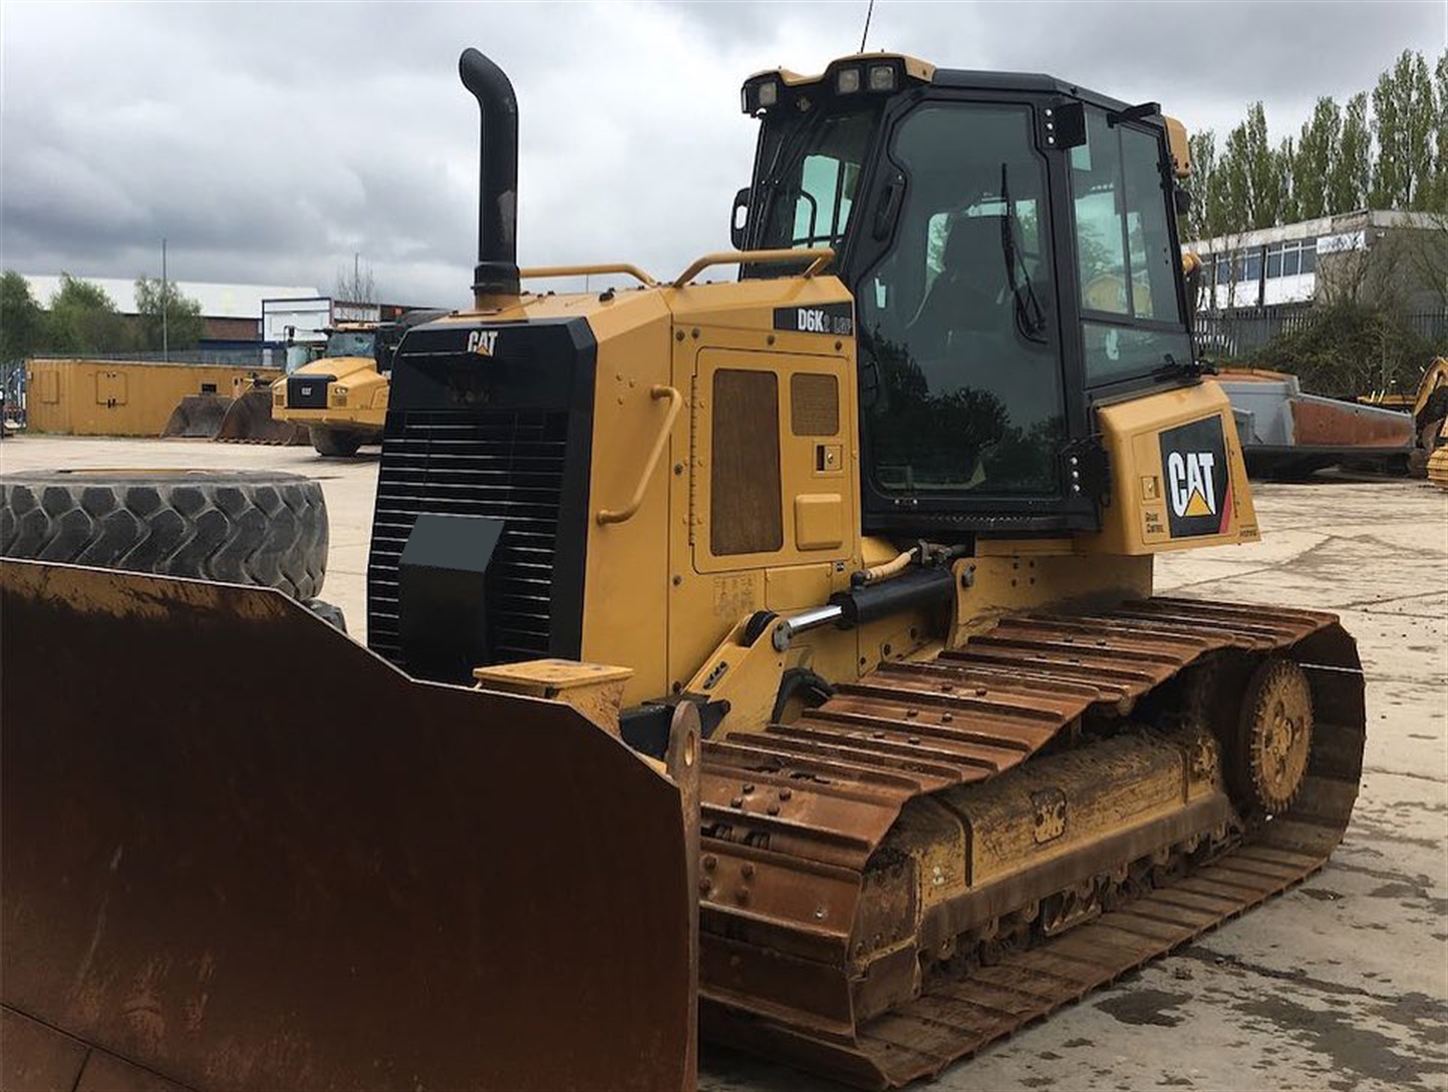 Finning on track to boost used equipment sales